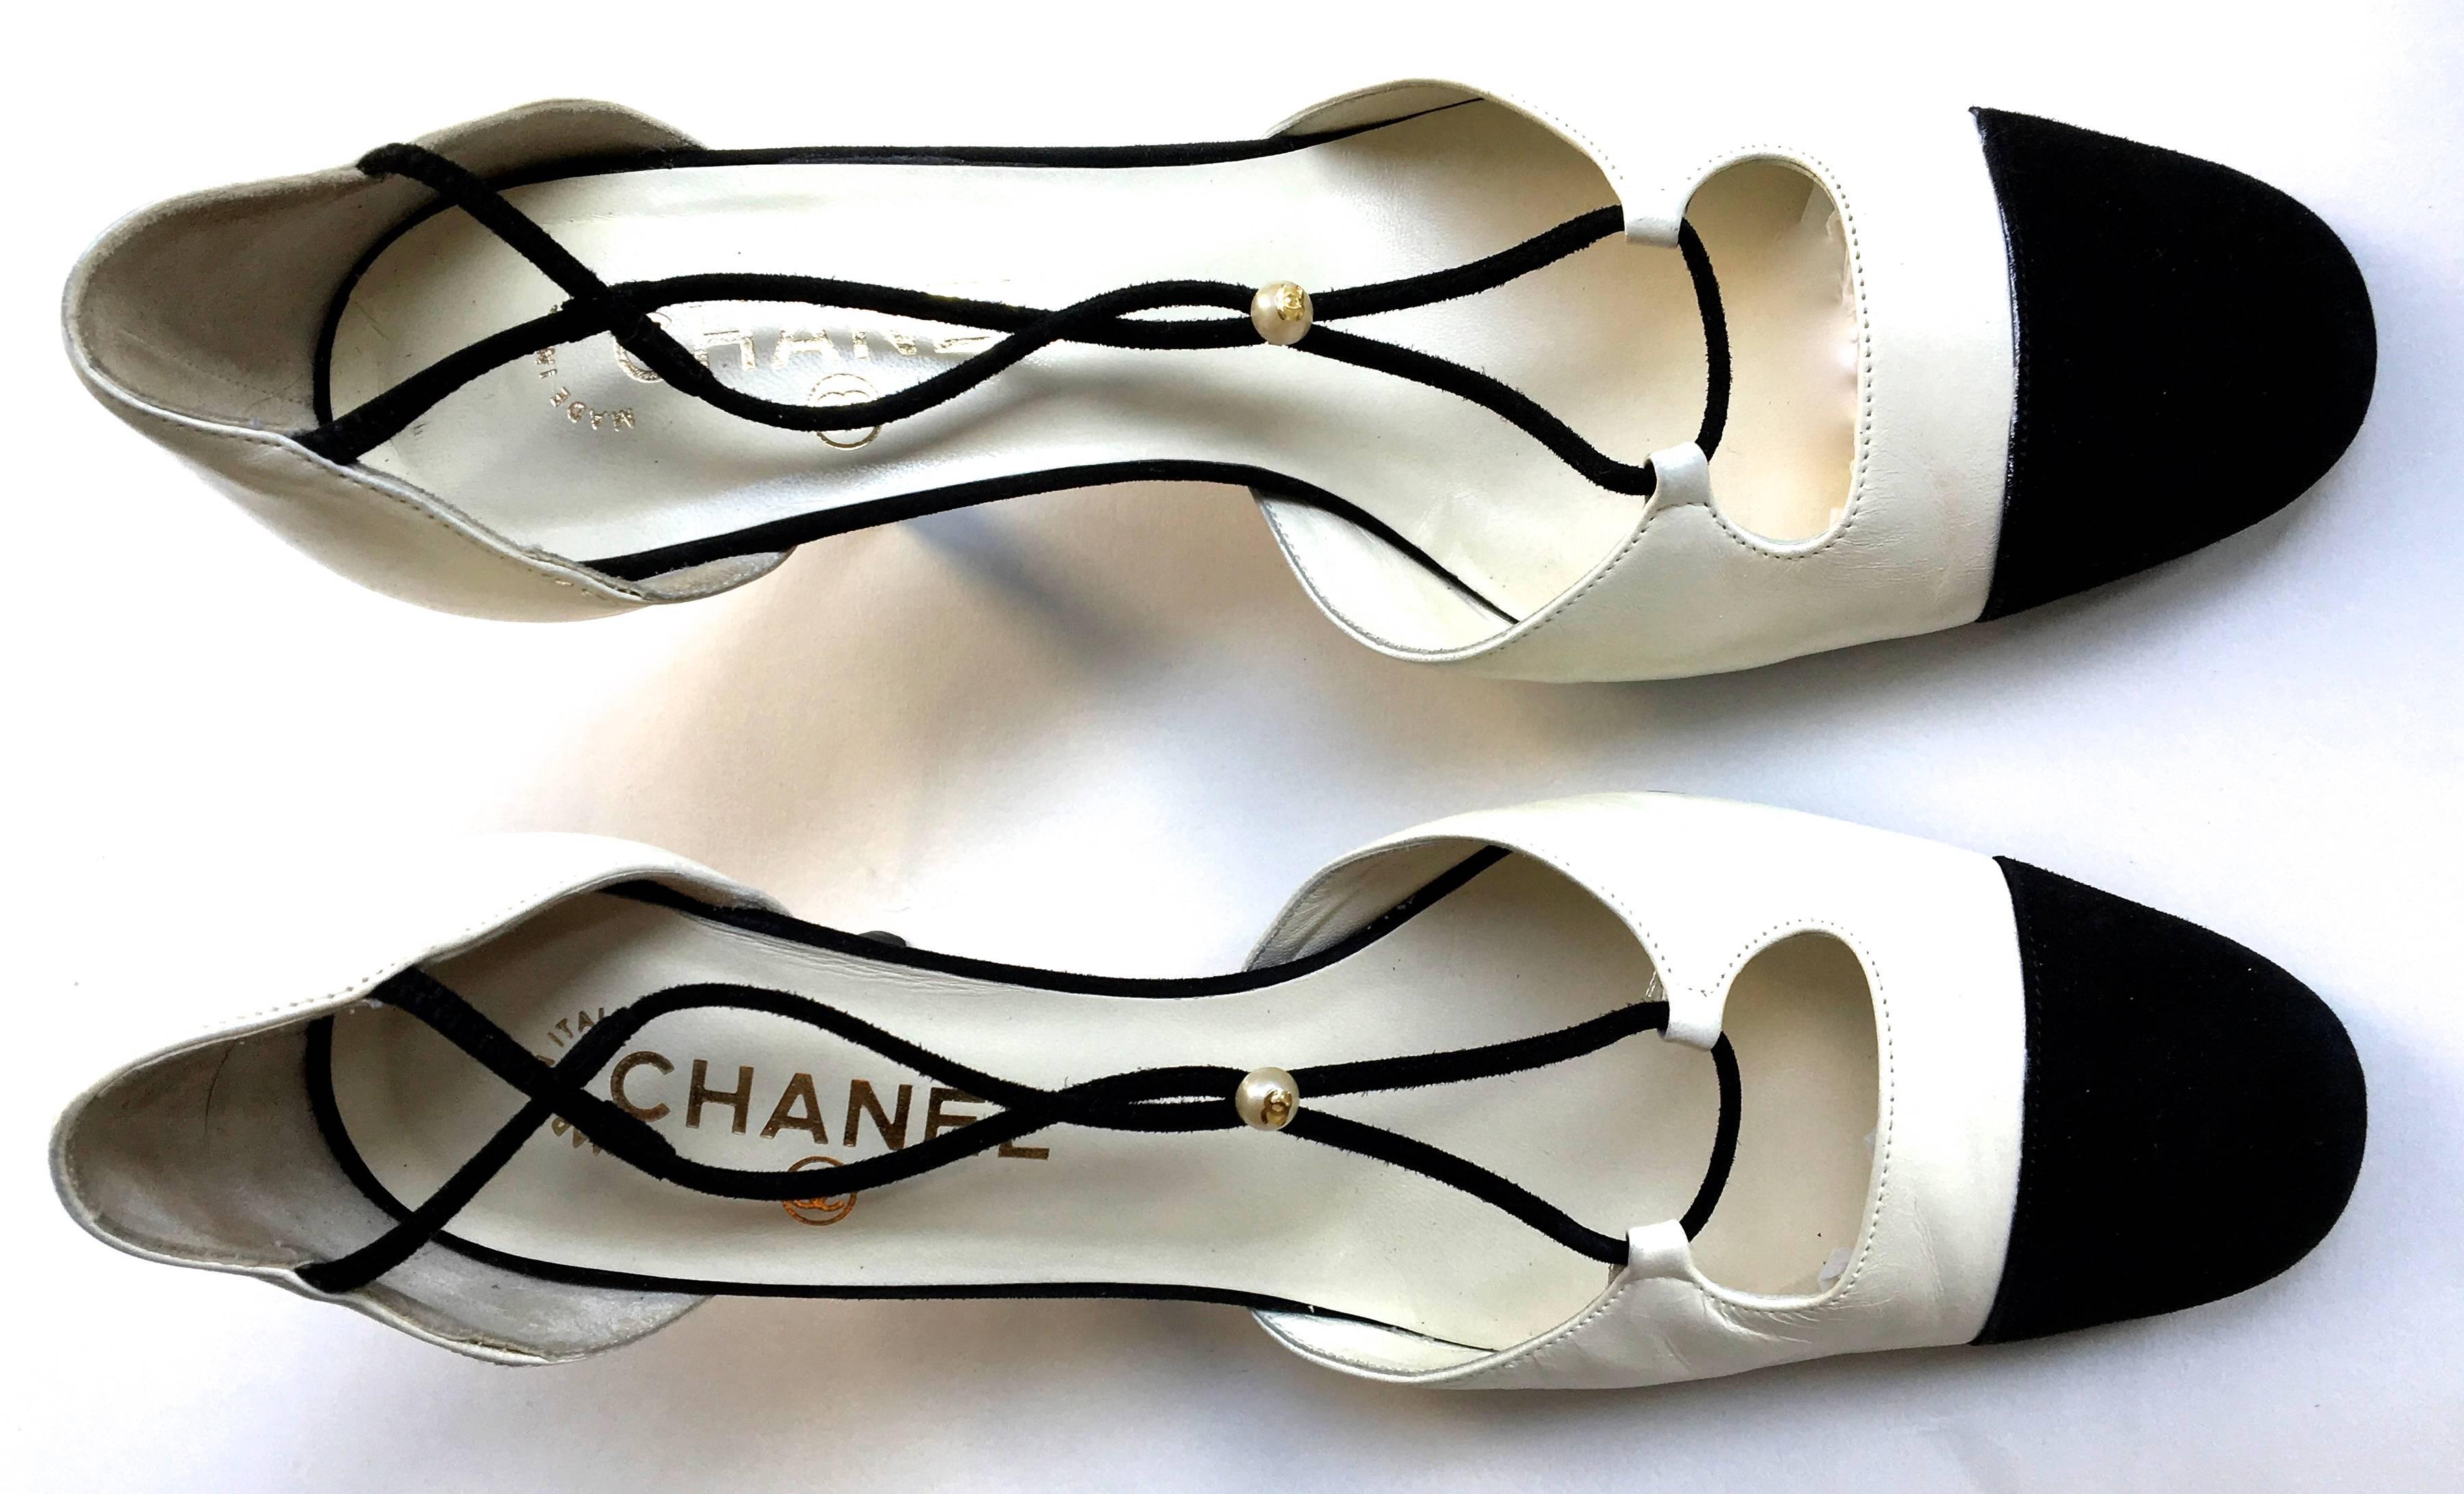 Chanel Shoes - Size 38 - Magnificent Black Suede with Creamy White Leather For Sale 5